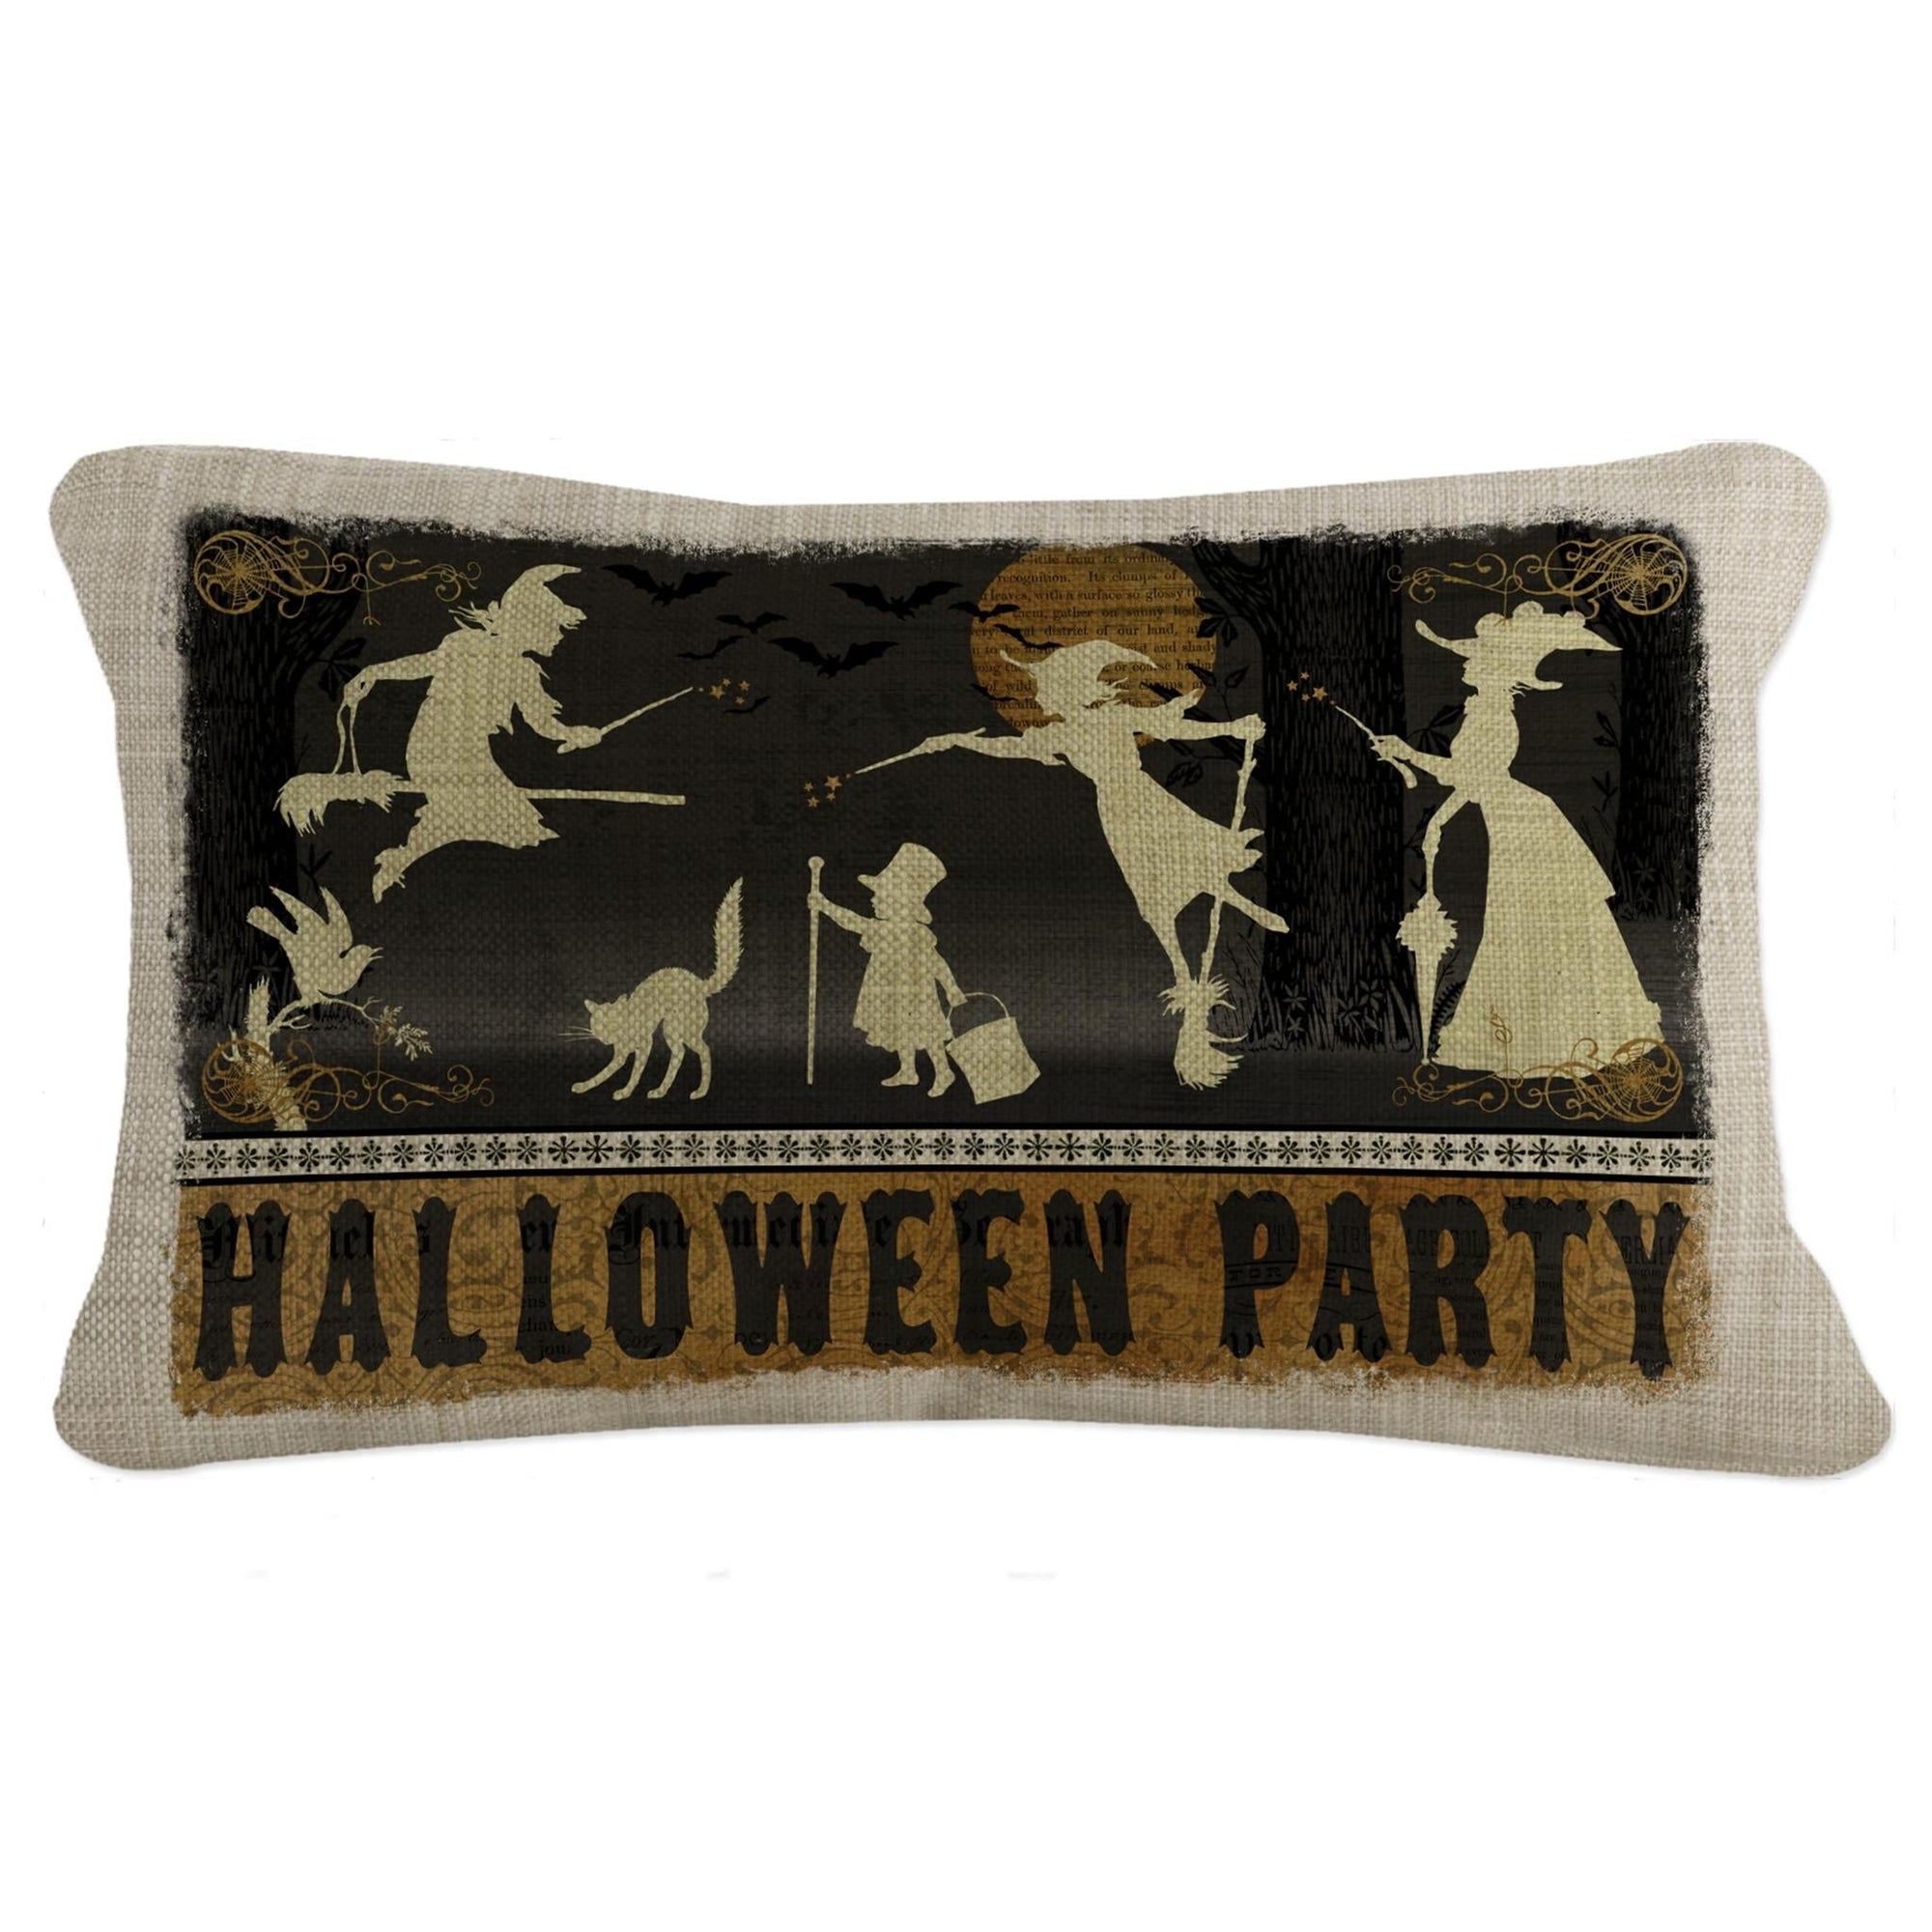 Heritage Lace Halloween Pillow | Halloween Party